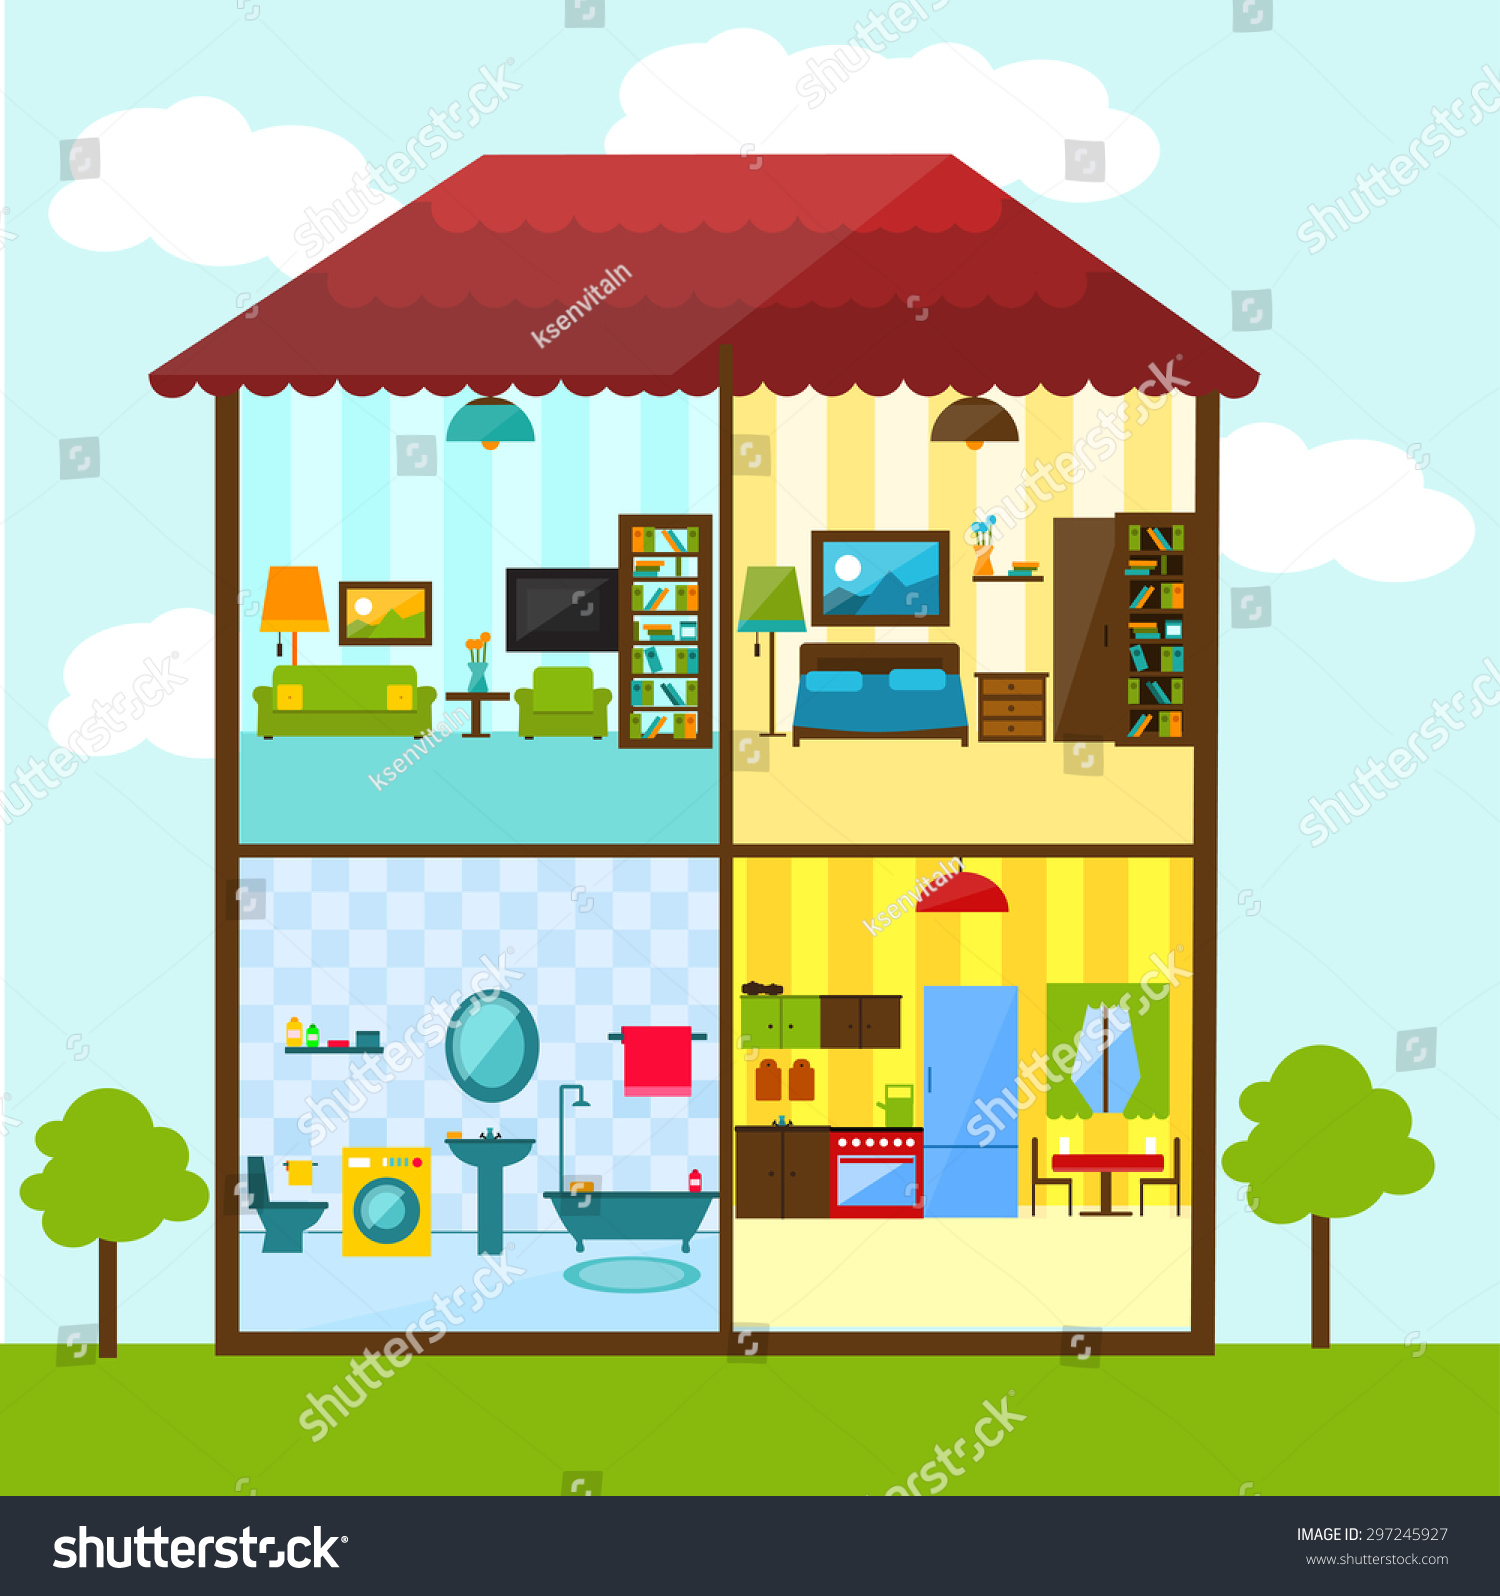 clipart of rooms in a house - photo #20